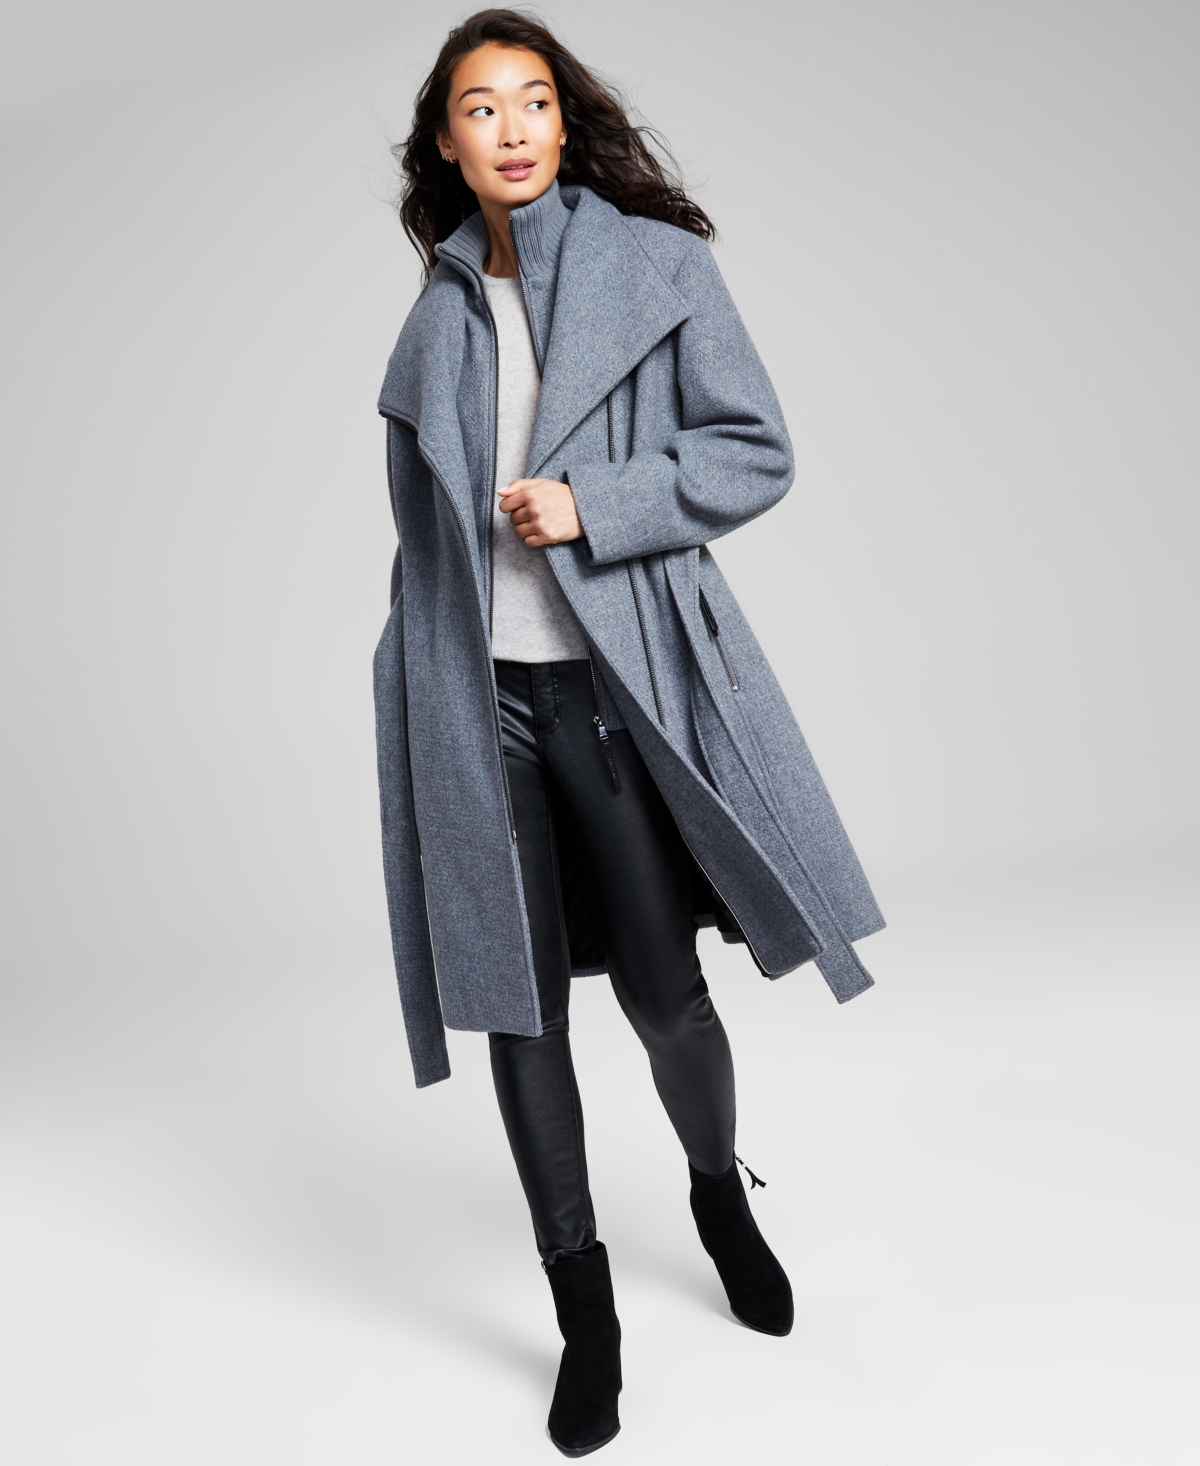 CALVIN KLEIN WOMEN'S PETITE BELTED WRAP COAT, CREATED FOR MACY'S